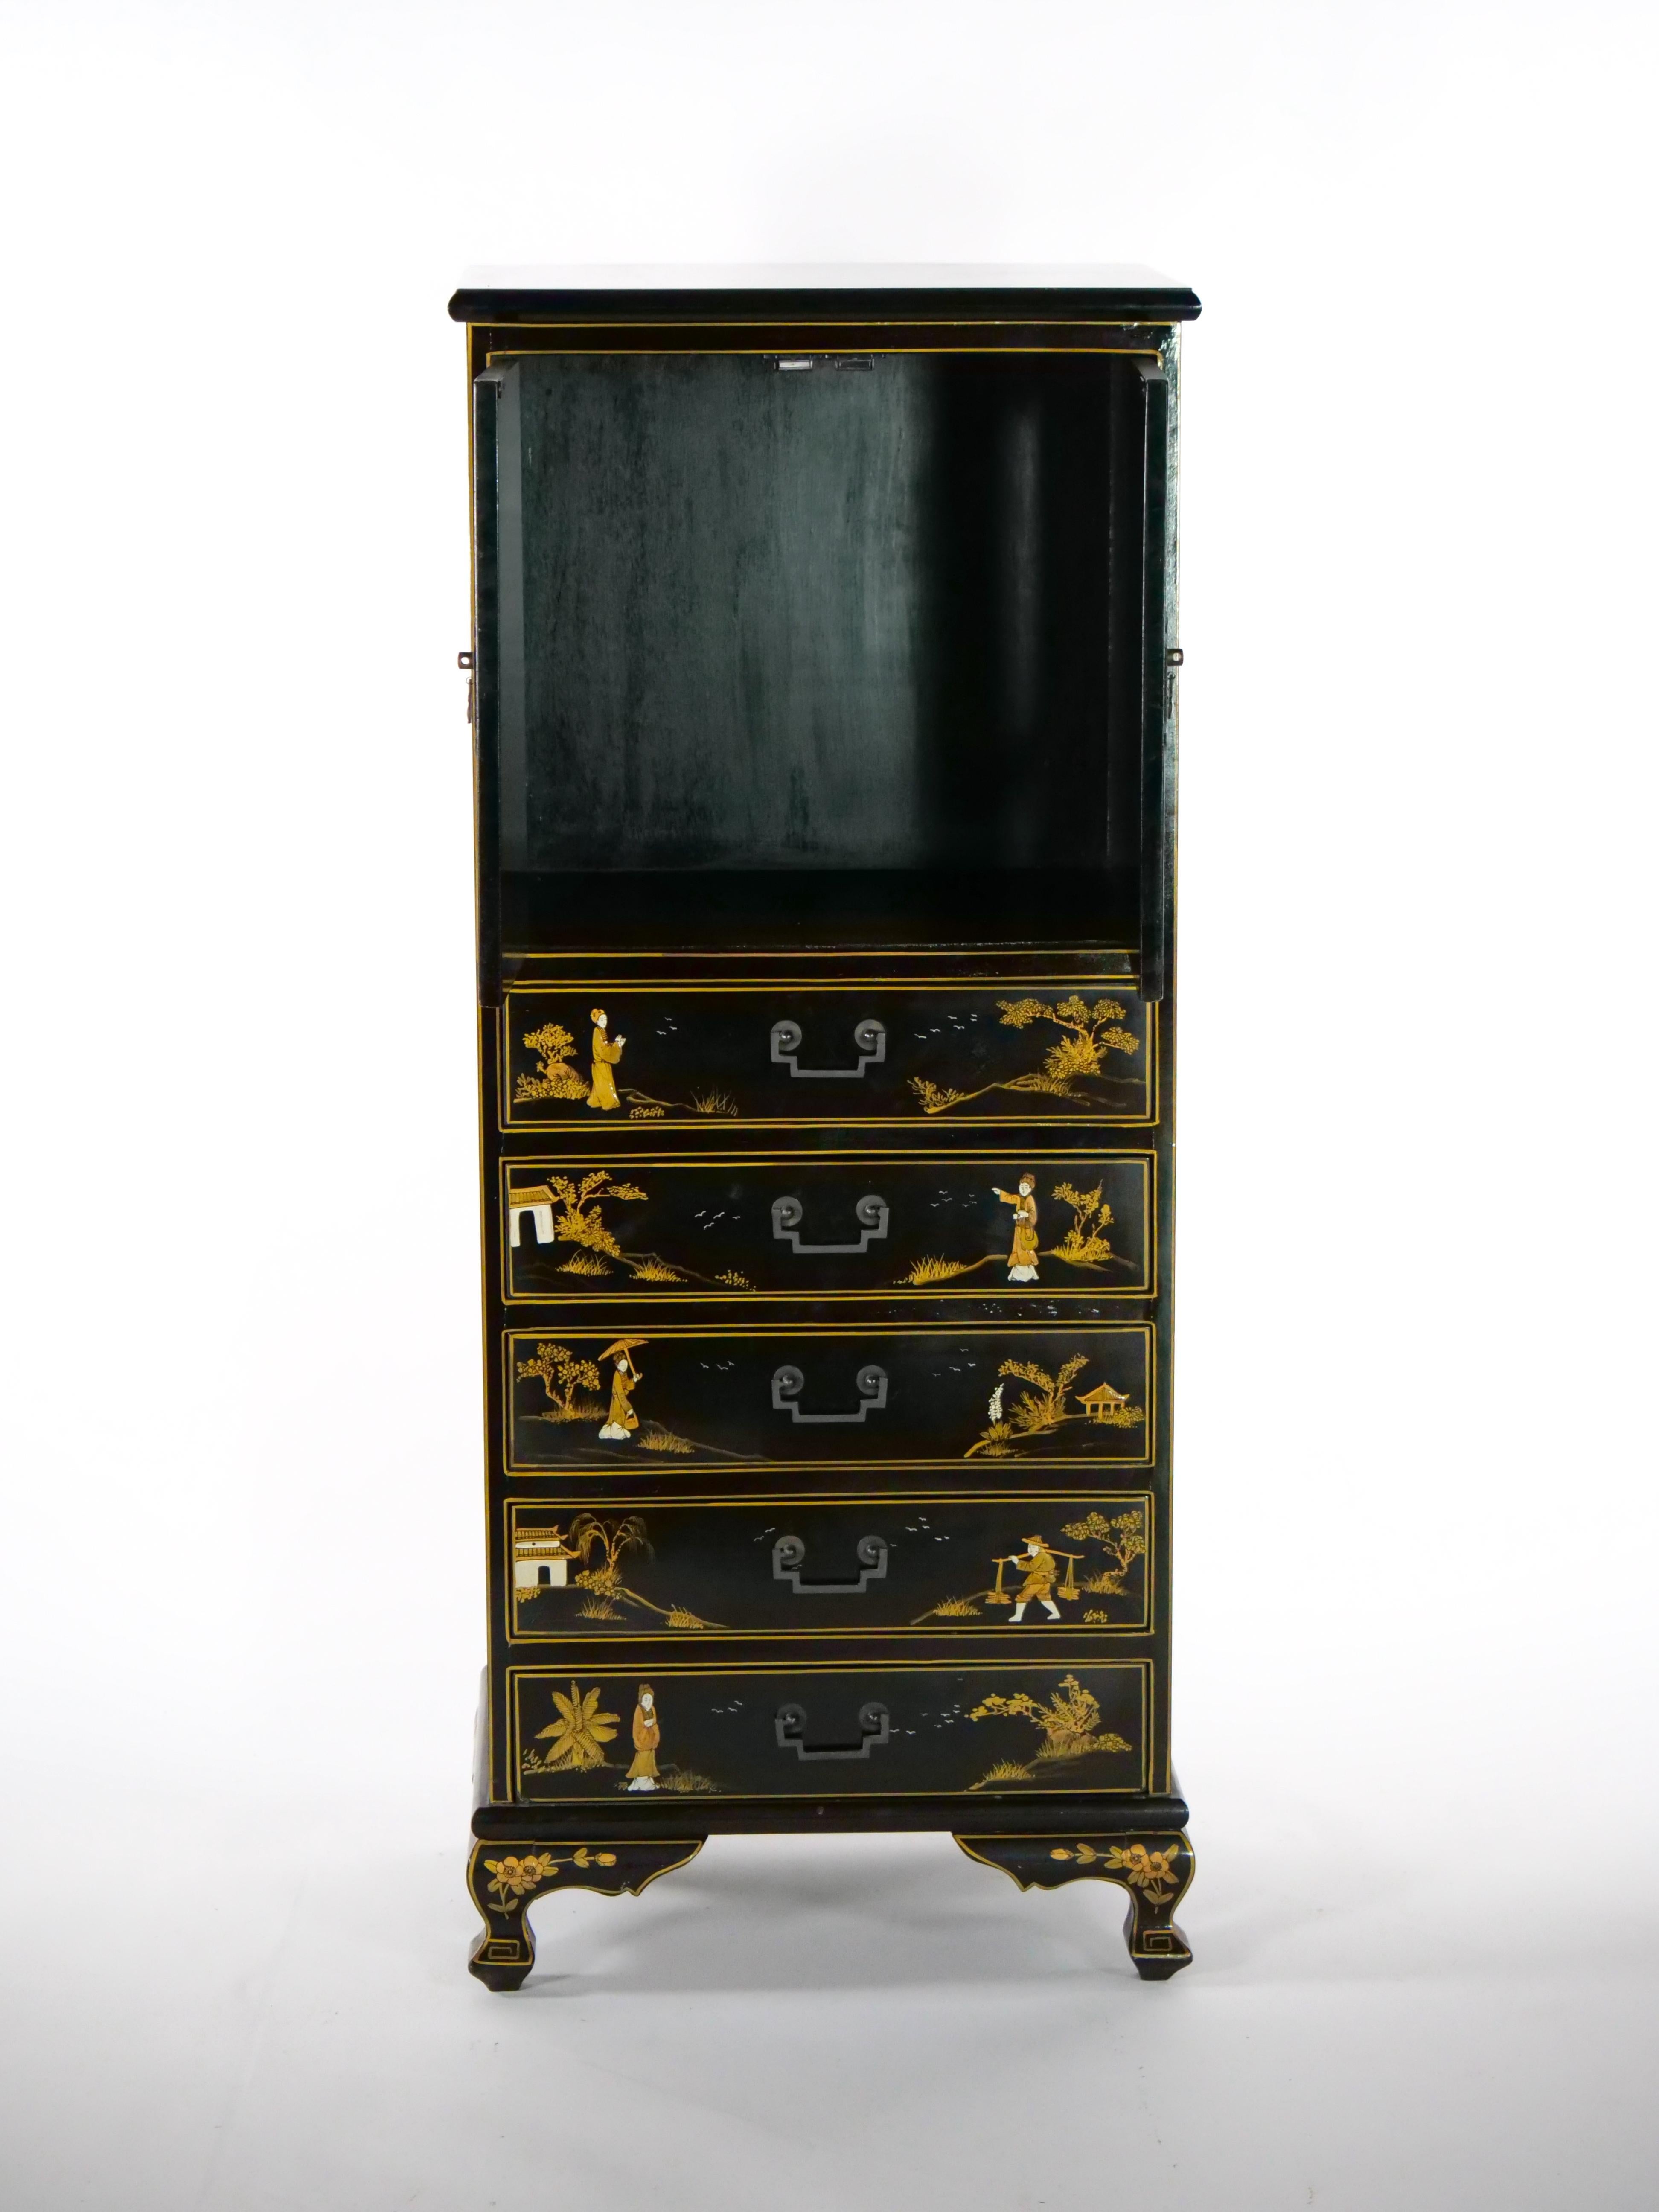 20th Century Hand Painted / Decorated Black Lacquer Dry Bar For Sale 8